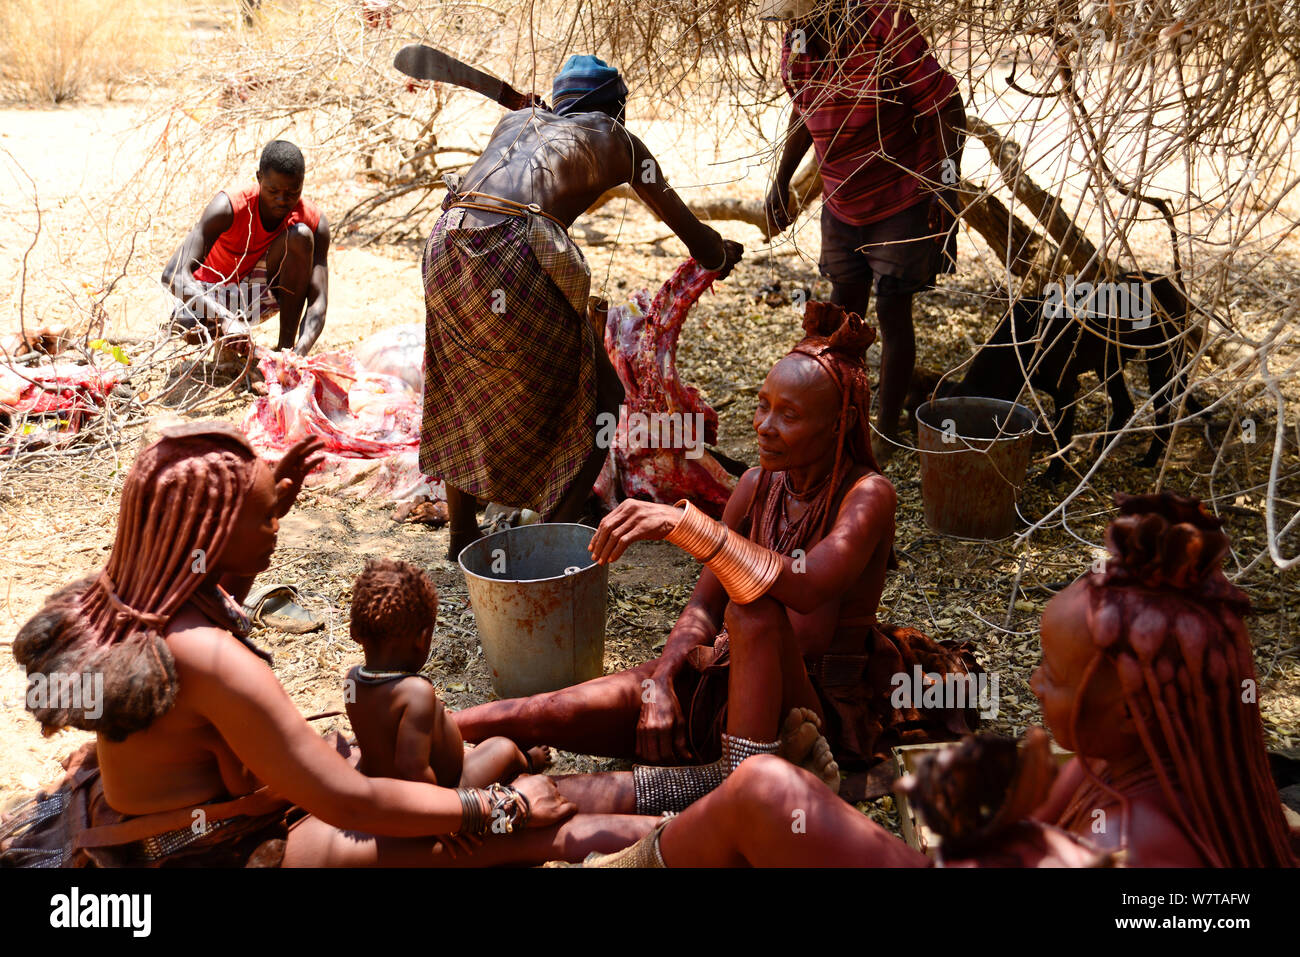 Himba family in the dry bed of a river, with women sitting in the shade of tree, while men butcher a cow, Kaokoland, Namibia, September 2013. Stock Photo